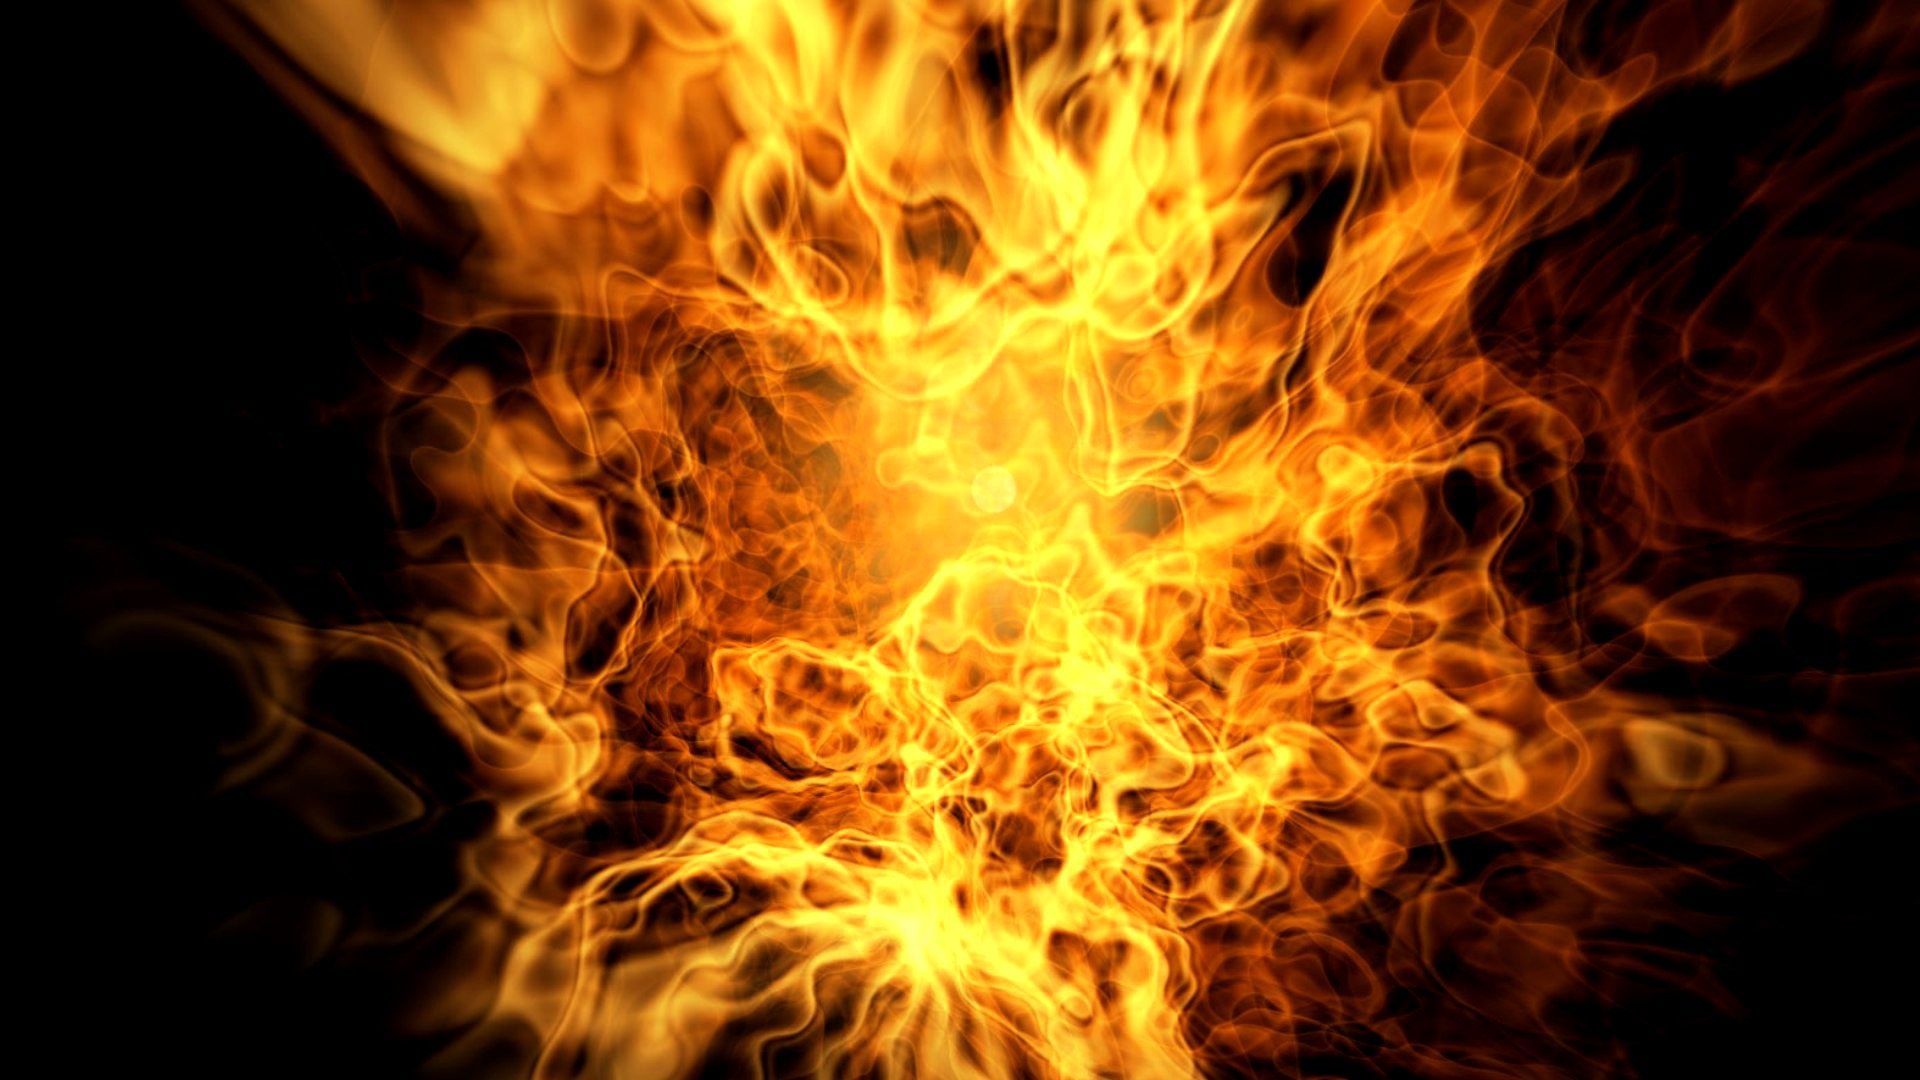 Flame Hd Wallpapers | Hd Wallpapers